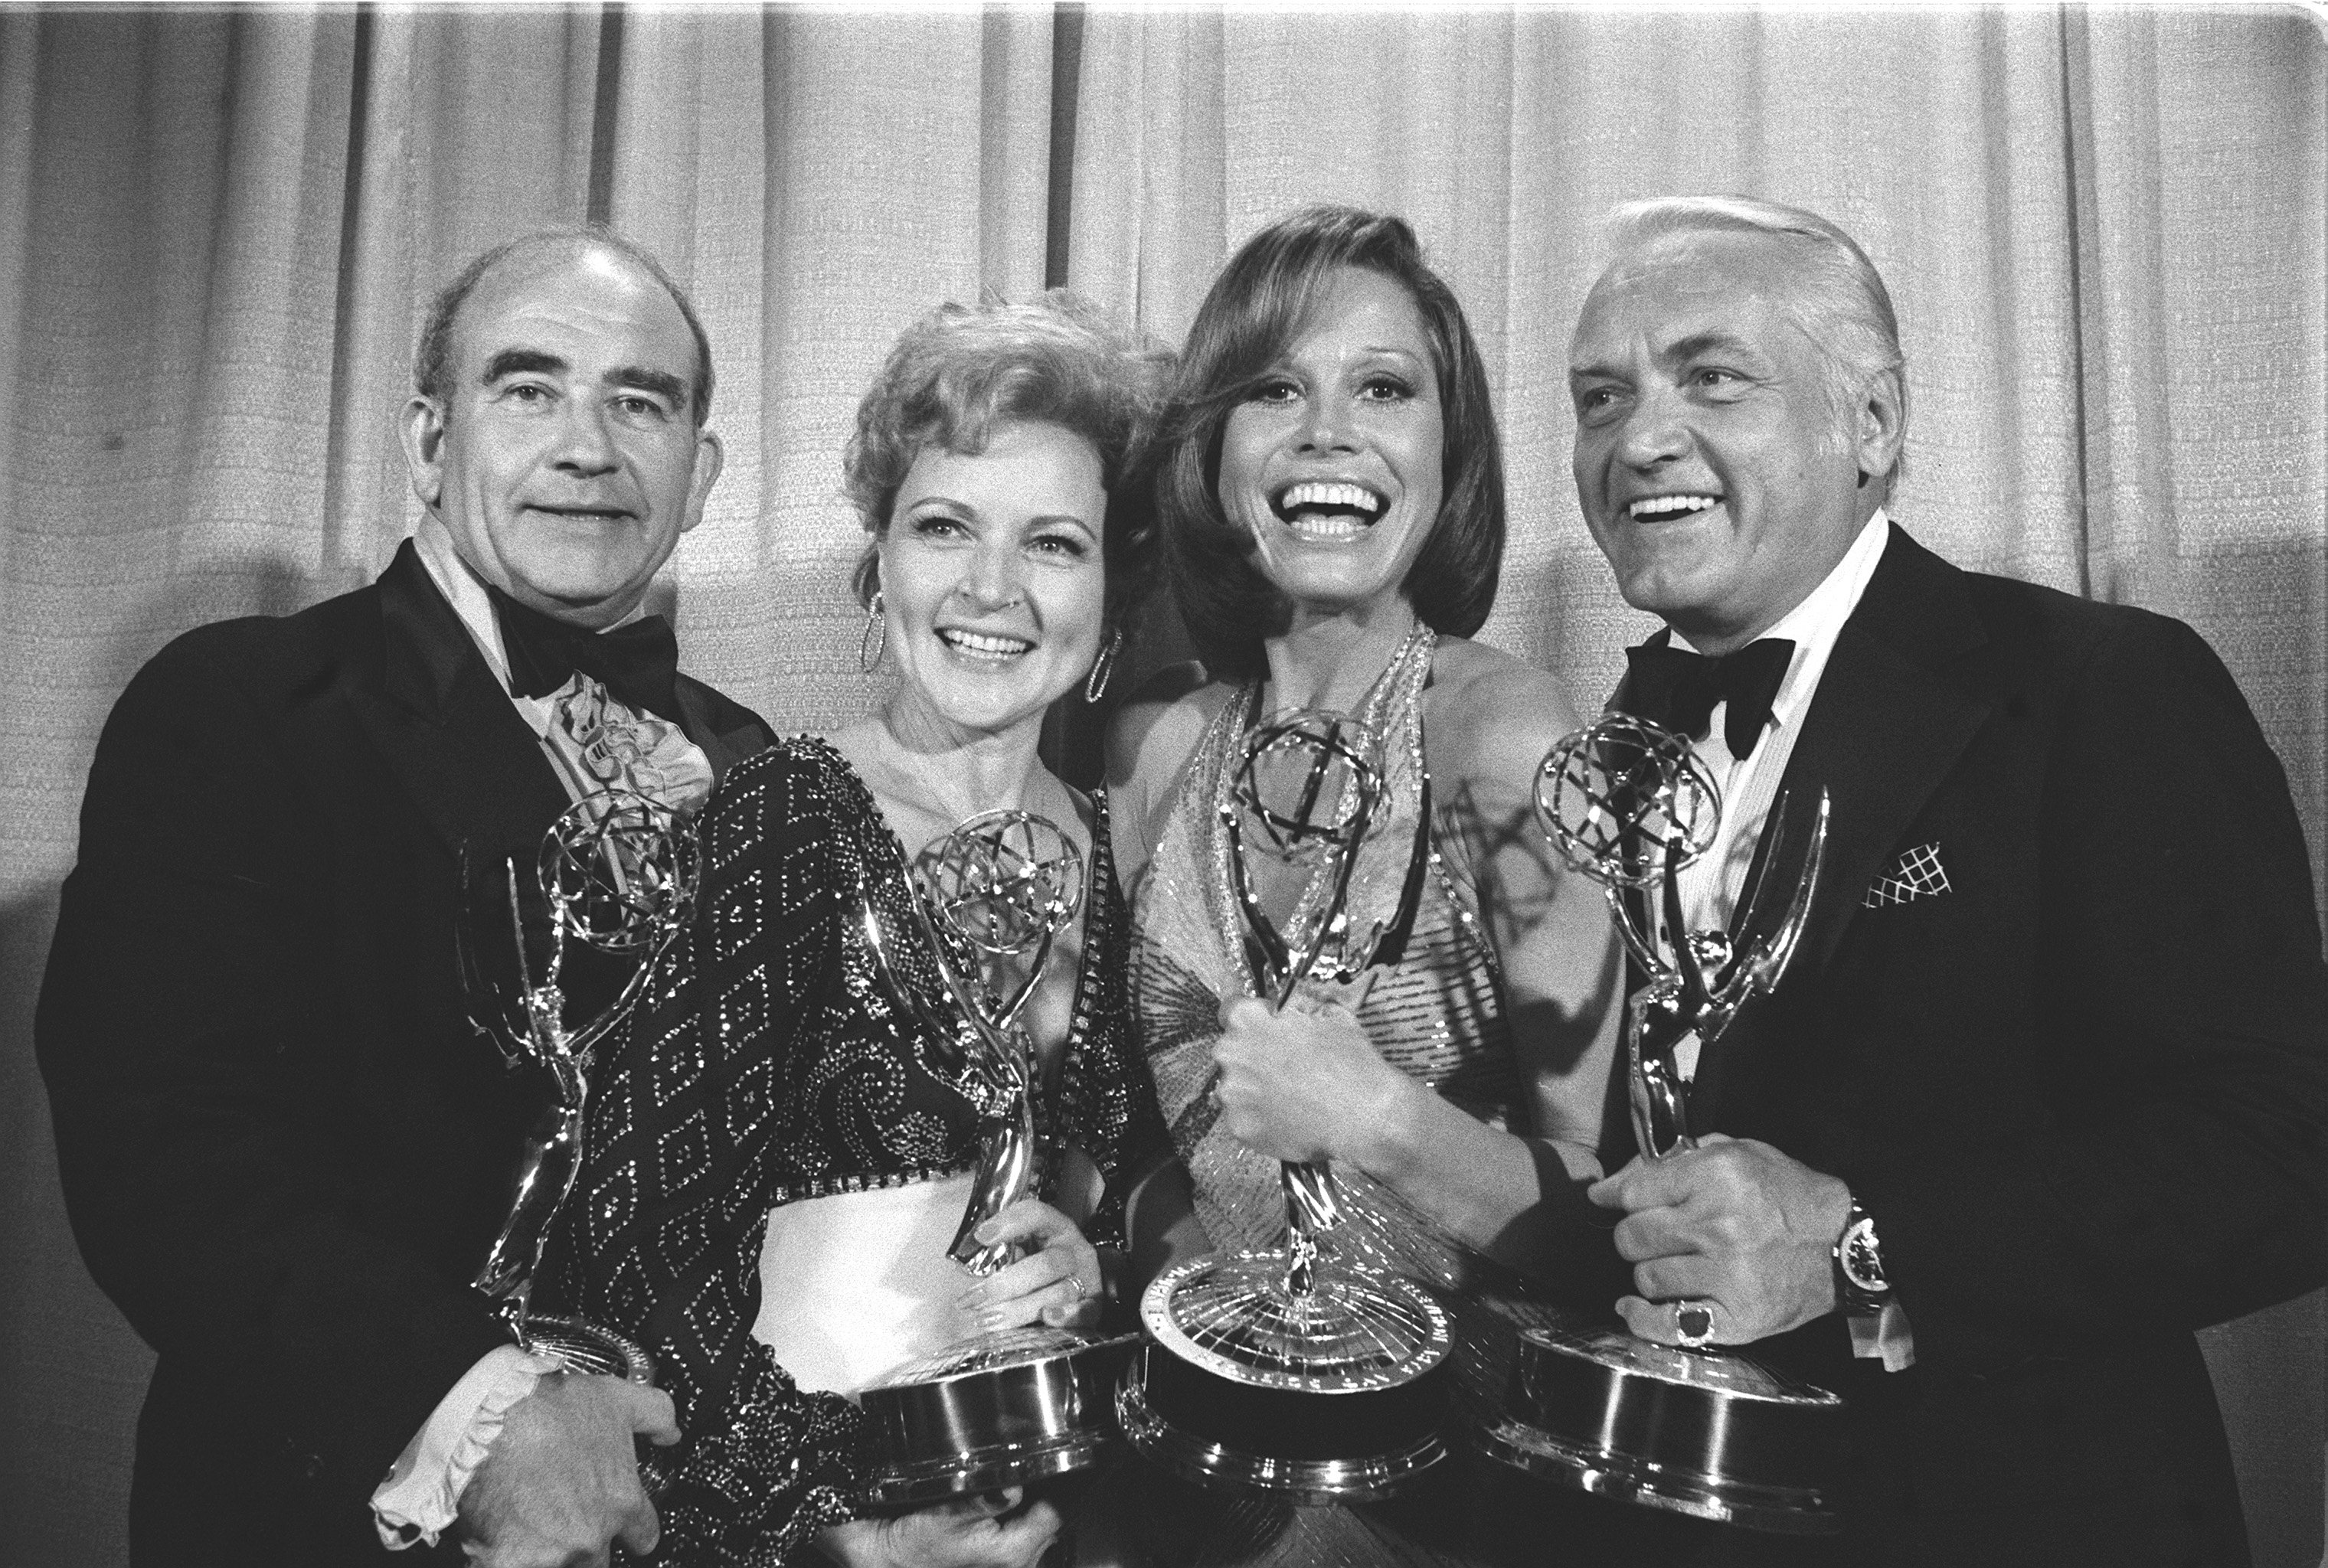 LOS ANGELES - 1. JANUAR: DIE MARY TYLER MOORE SHOW: Emmy Awards. (von links) Edward Asner, Betty White, Mary Tyler Moore, Ted Knight. | Quelle: Getty Images